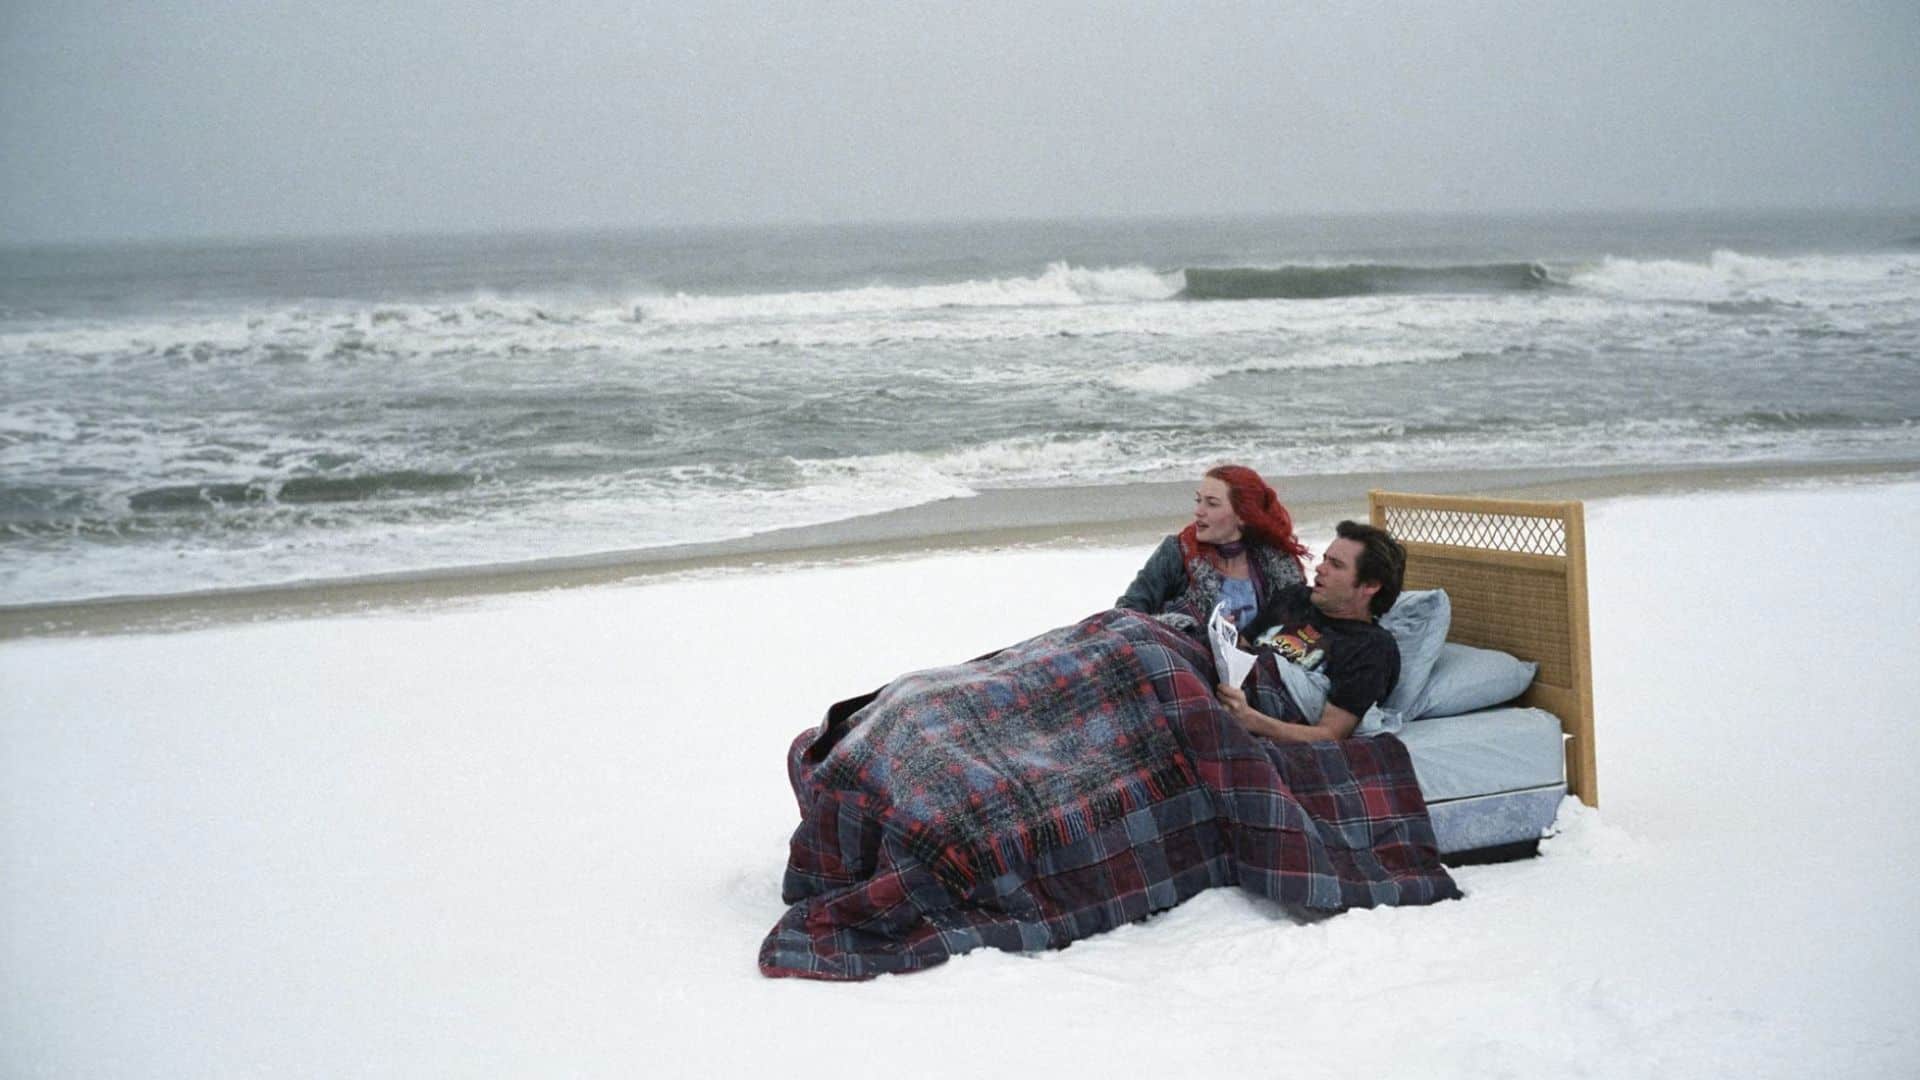 Clementine and Joel in a bed on the beach in this image from Amazon Prime Video